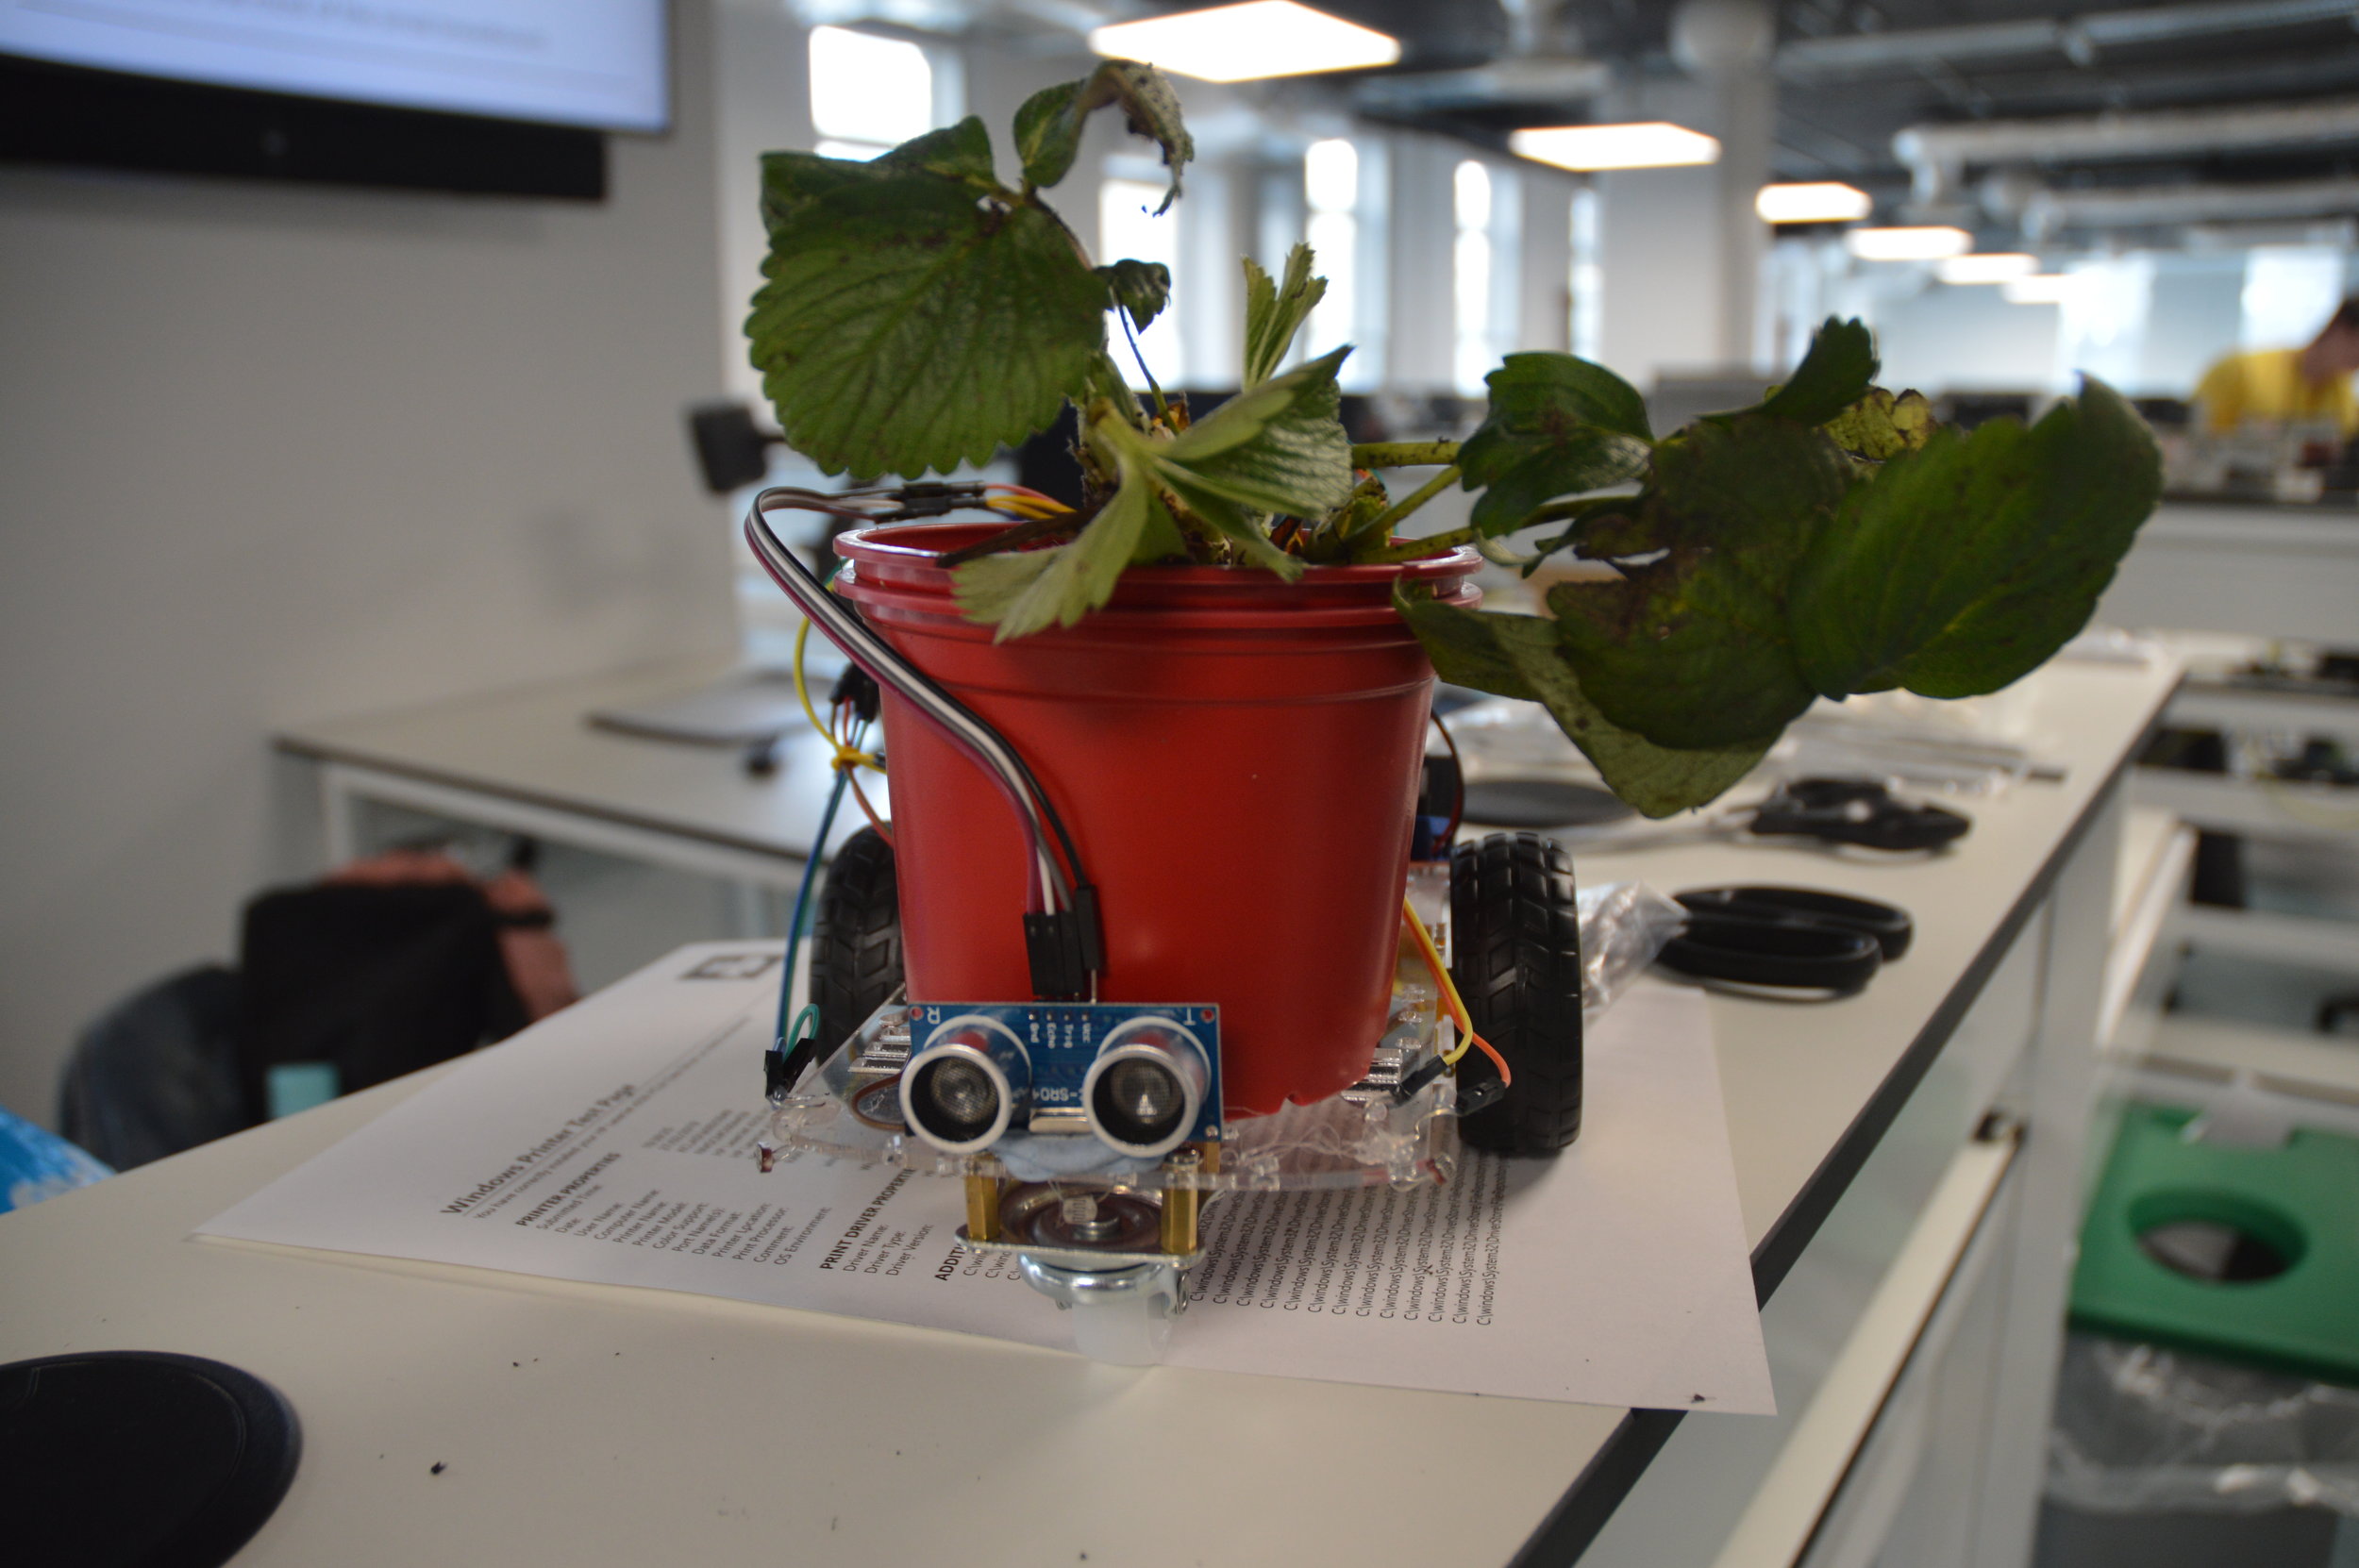 The end-goal mobile growbot w/strawberry plant